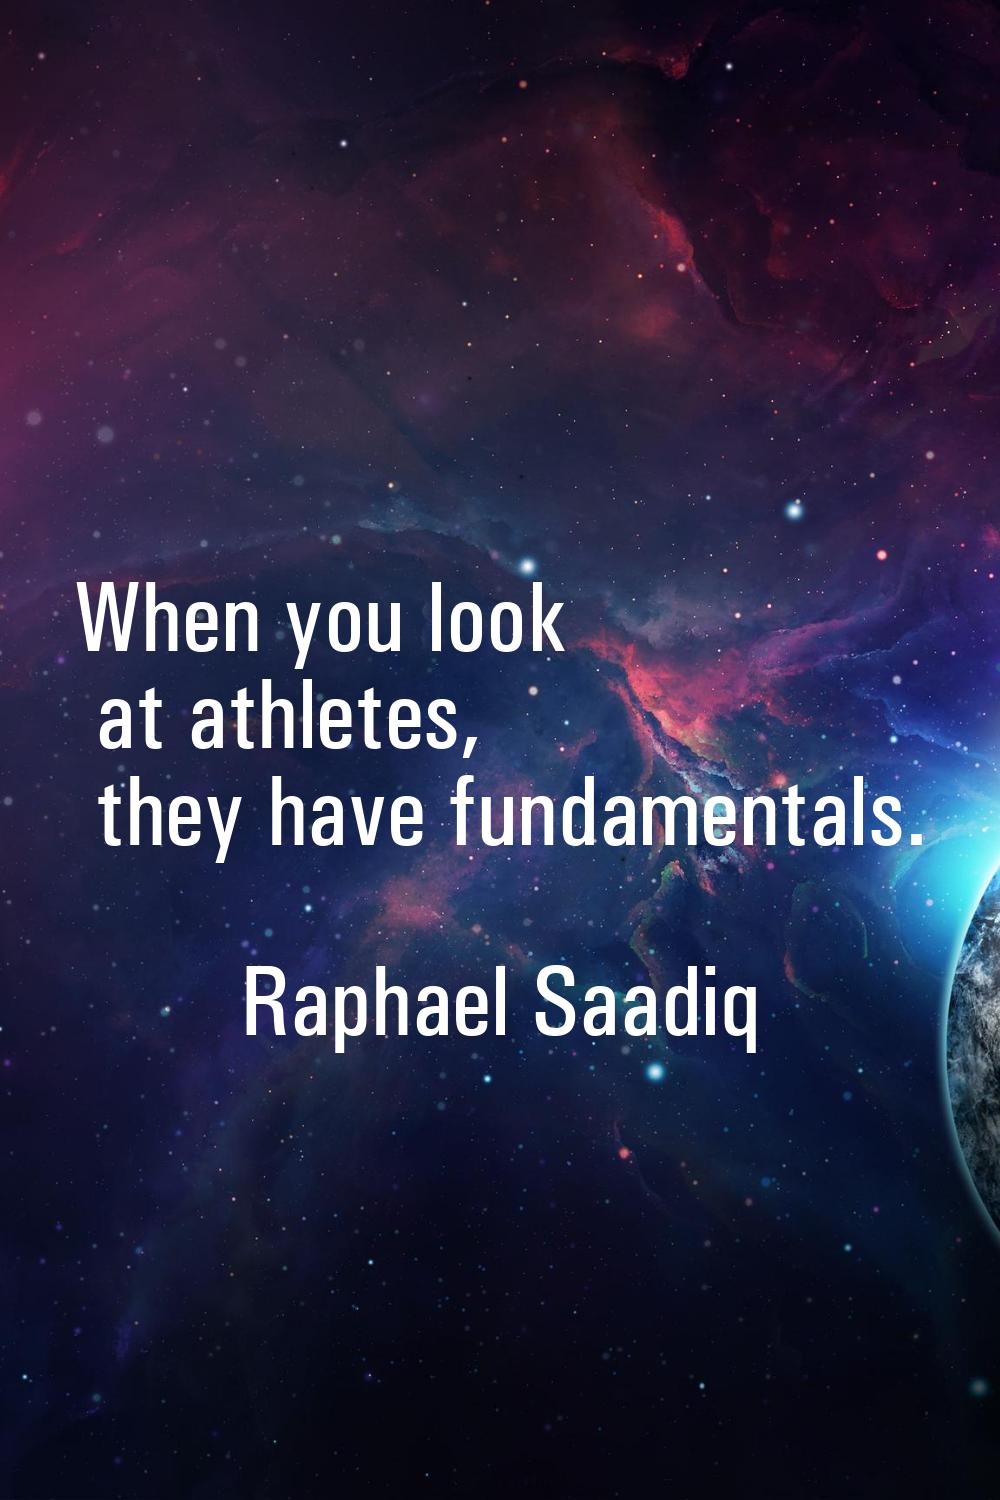 When you look at athletes, they have fundamentals.